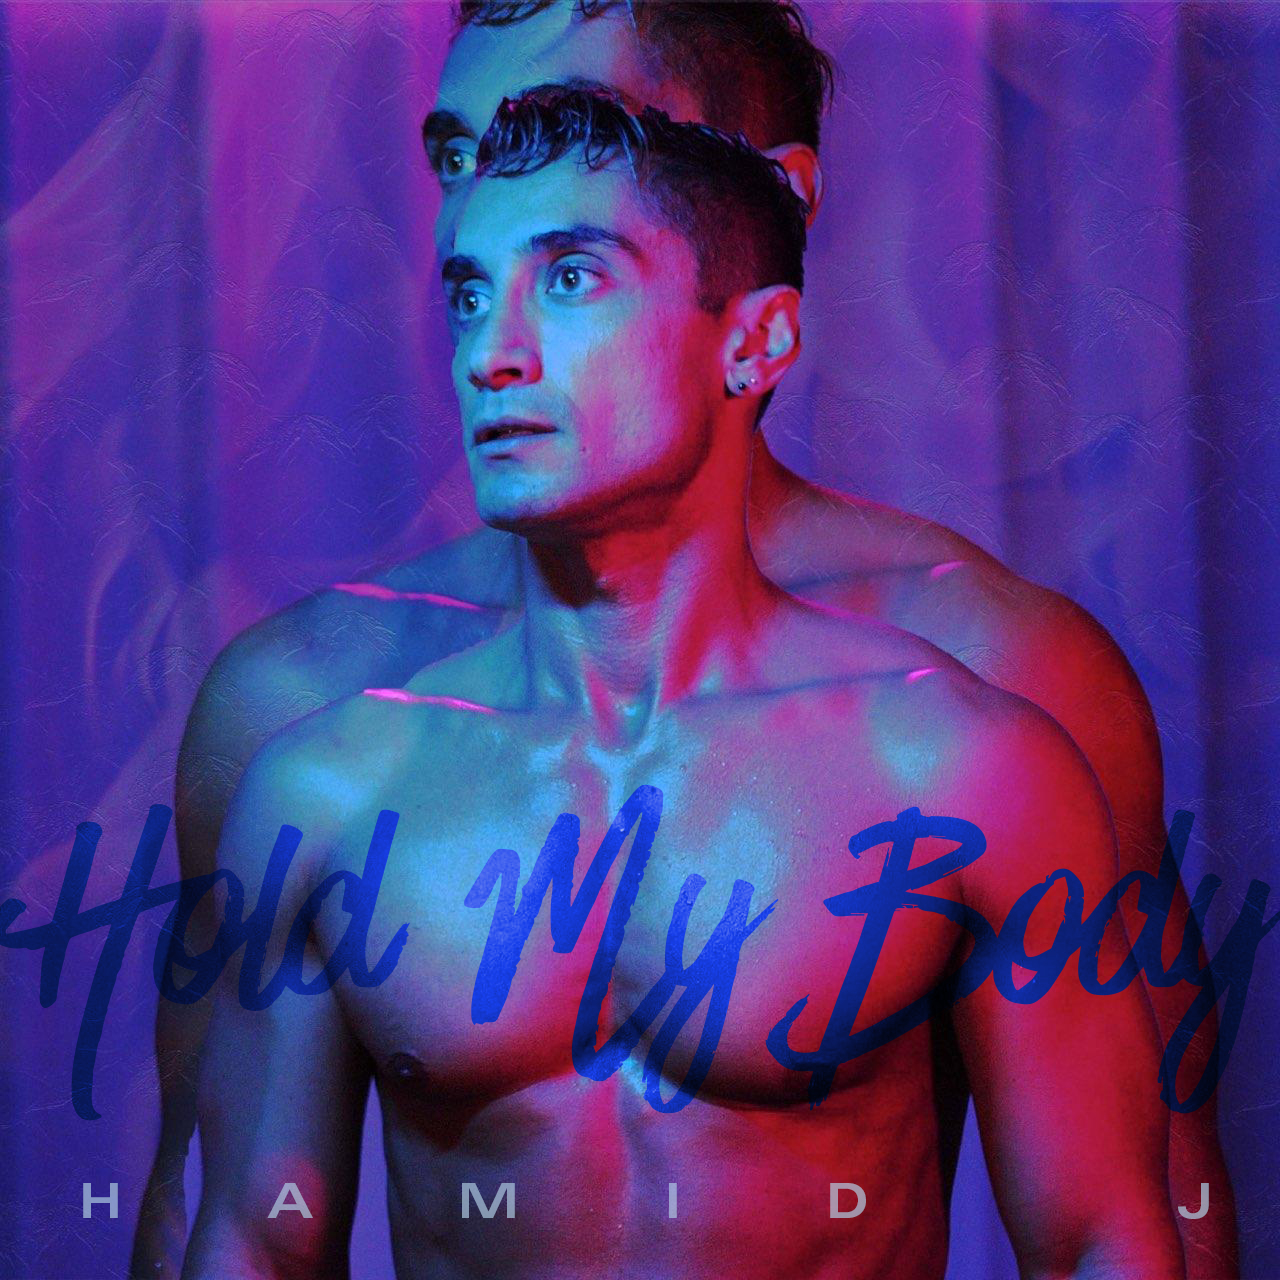 Reclaiming Control Over the Narrative With Rhythmic Pop - Rising LGBTQ Artist Hamid J Unveils Stunning Release